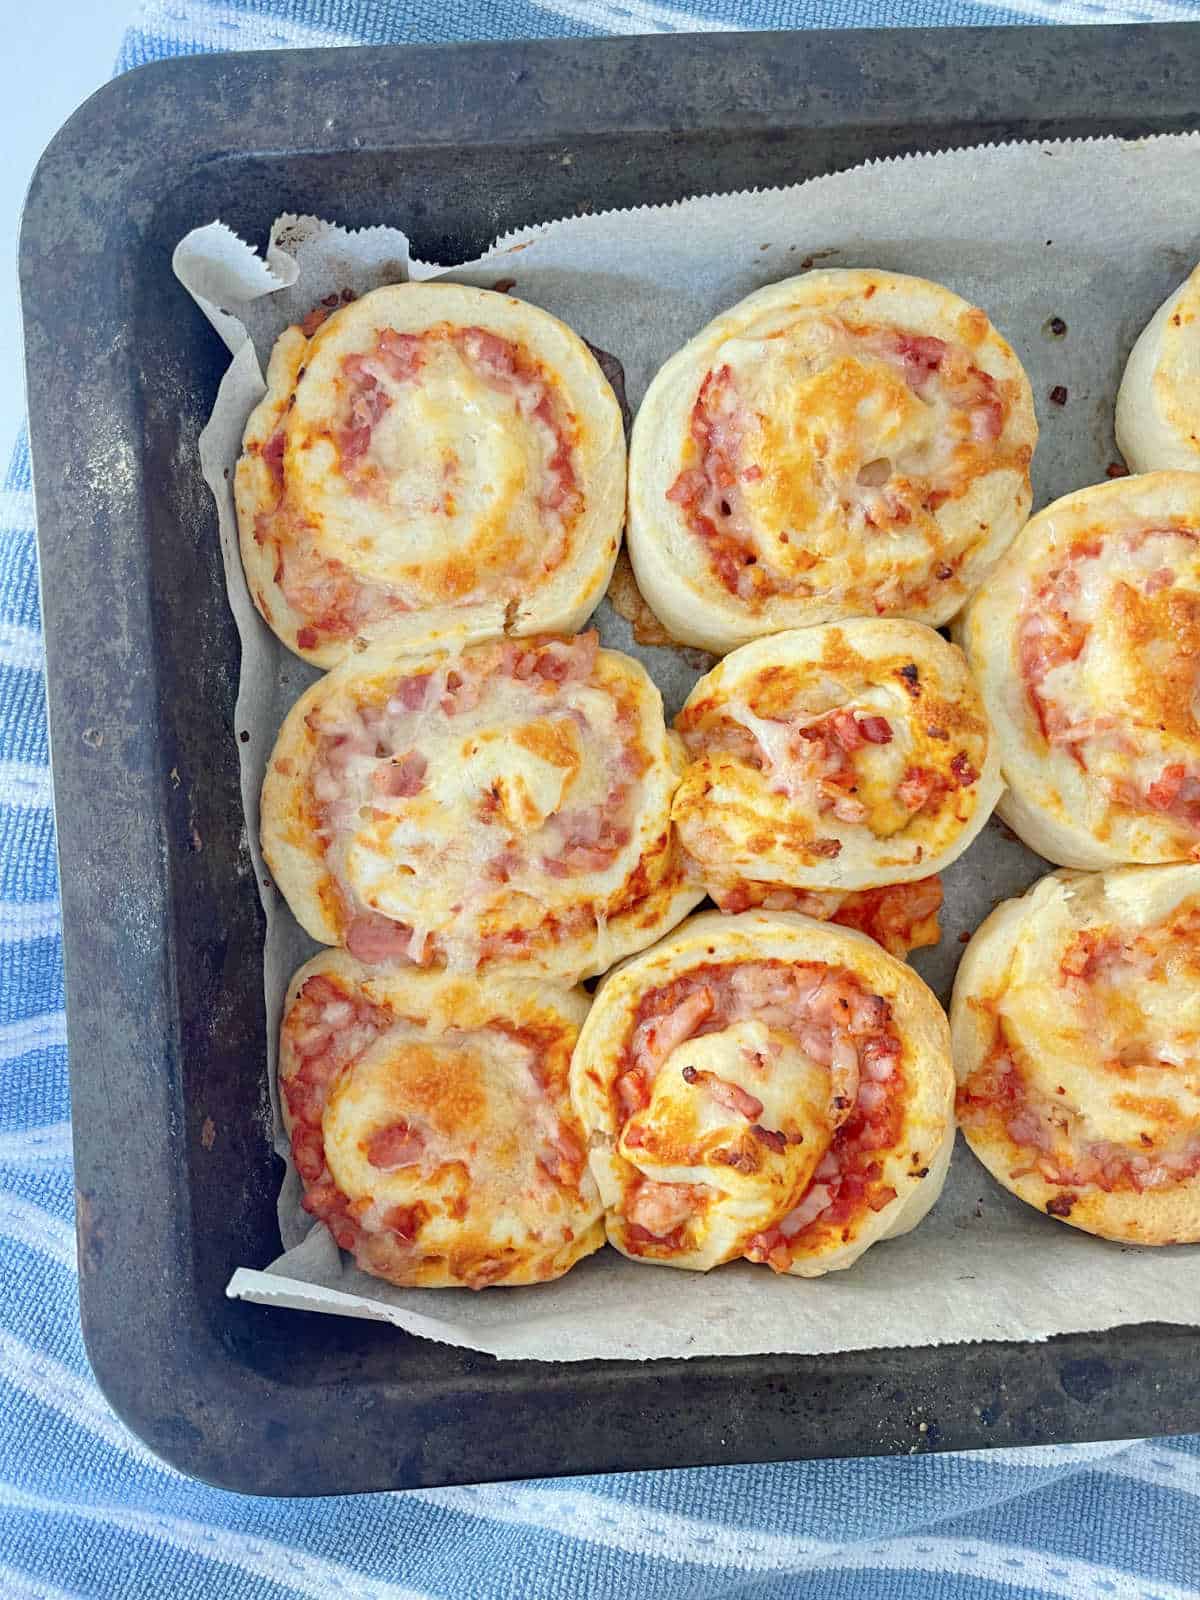 Pizza Scrolls straight from the oven sitting in baking tray which is on top of a blue and white striped tea towel.